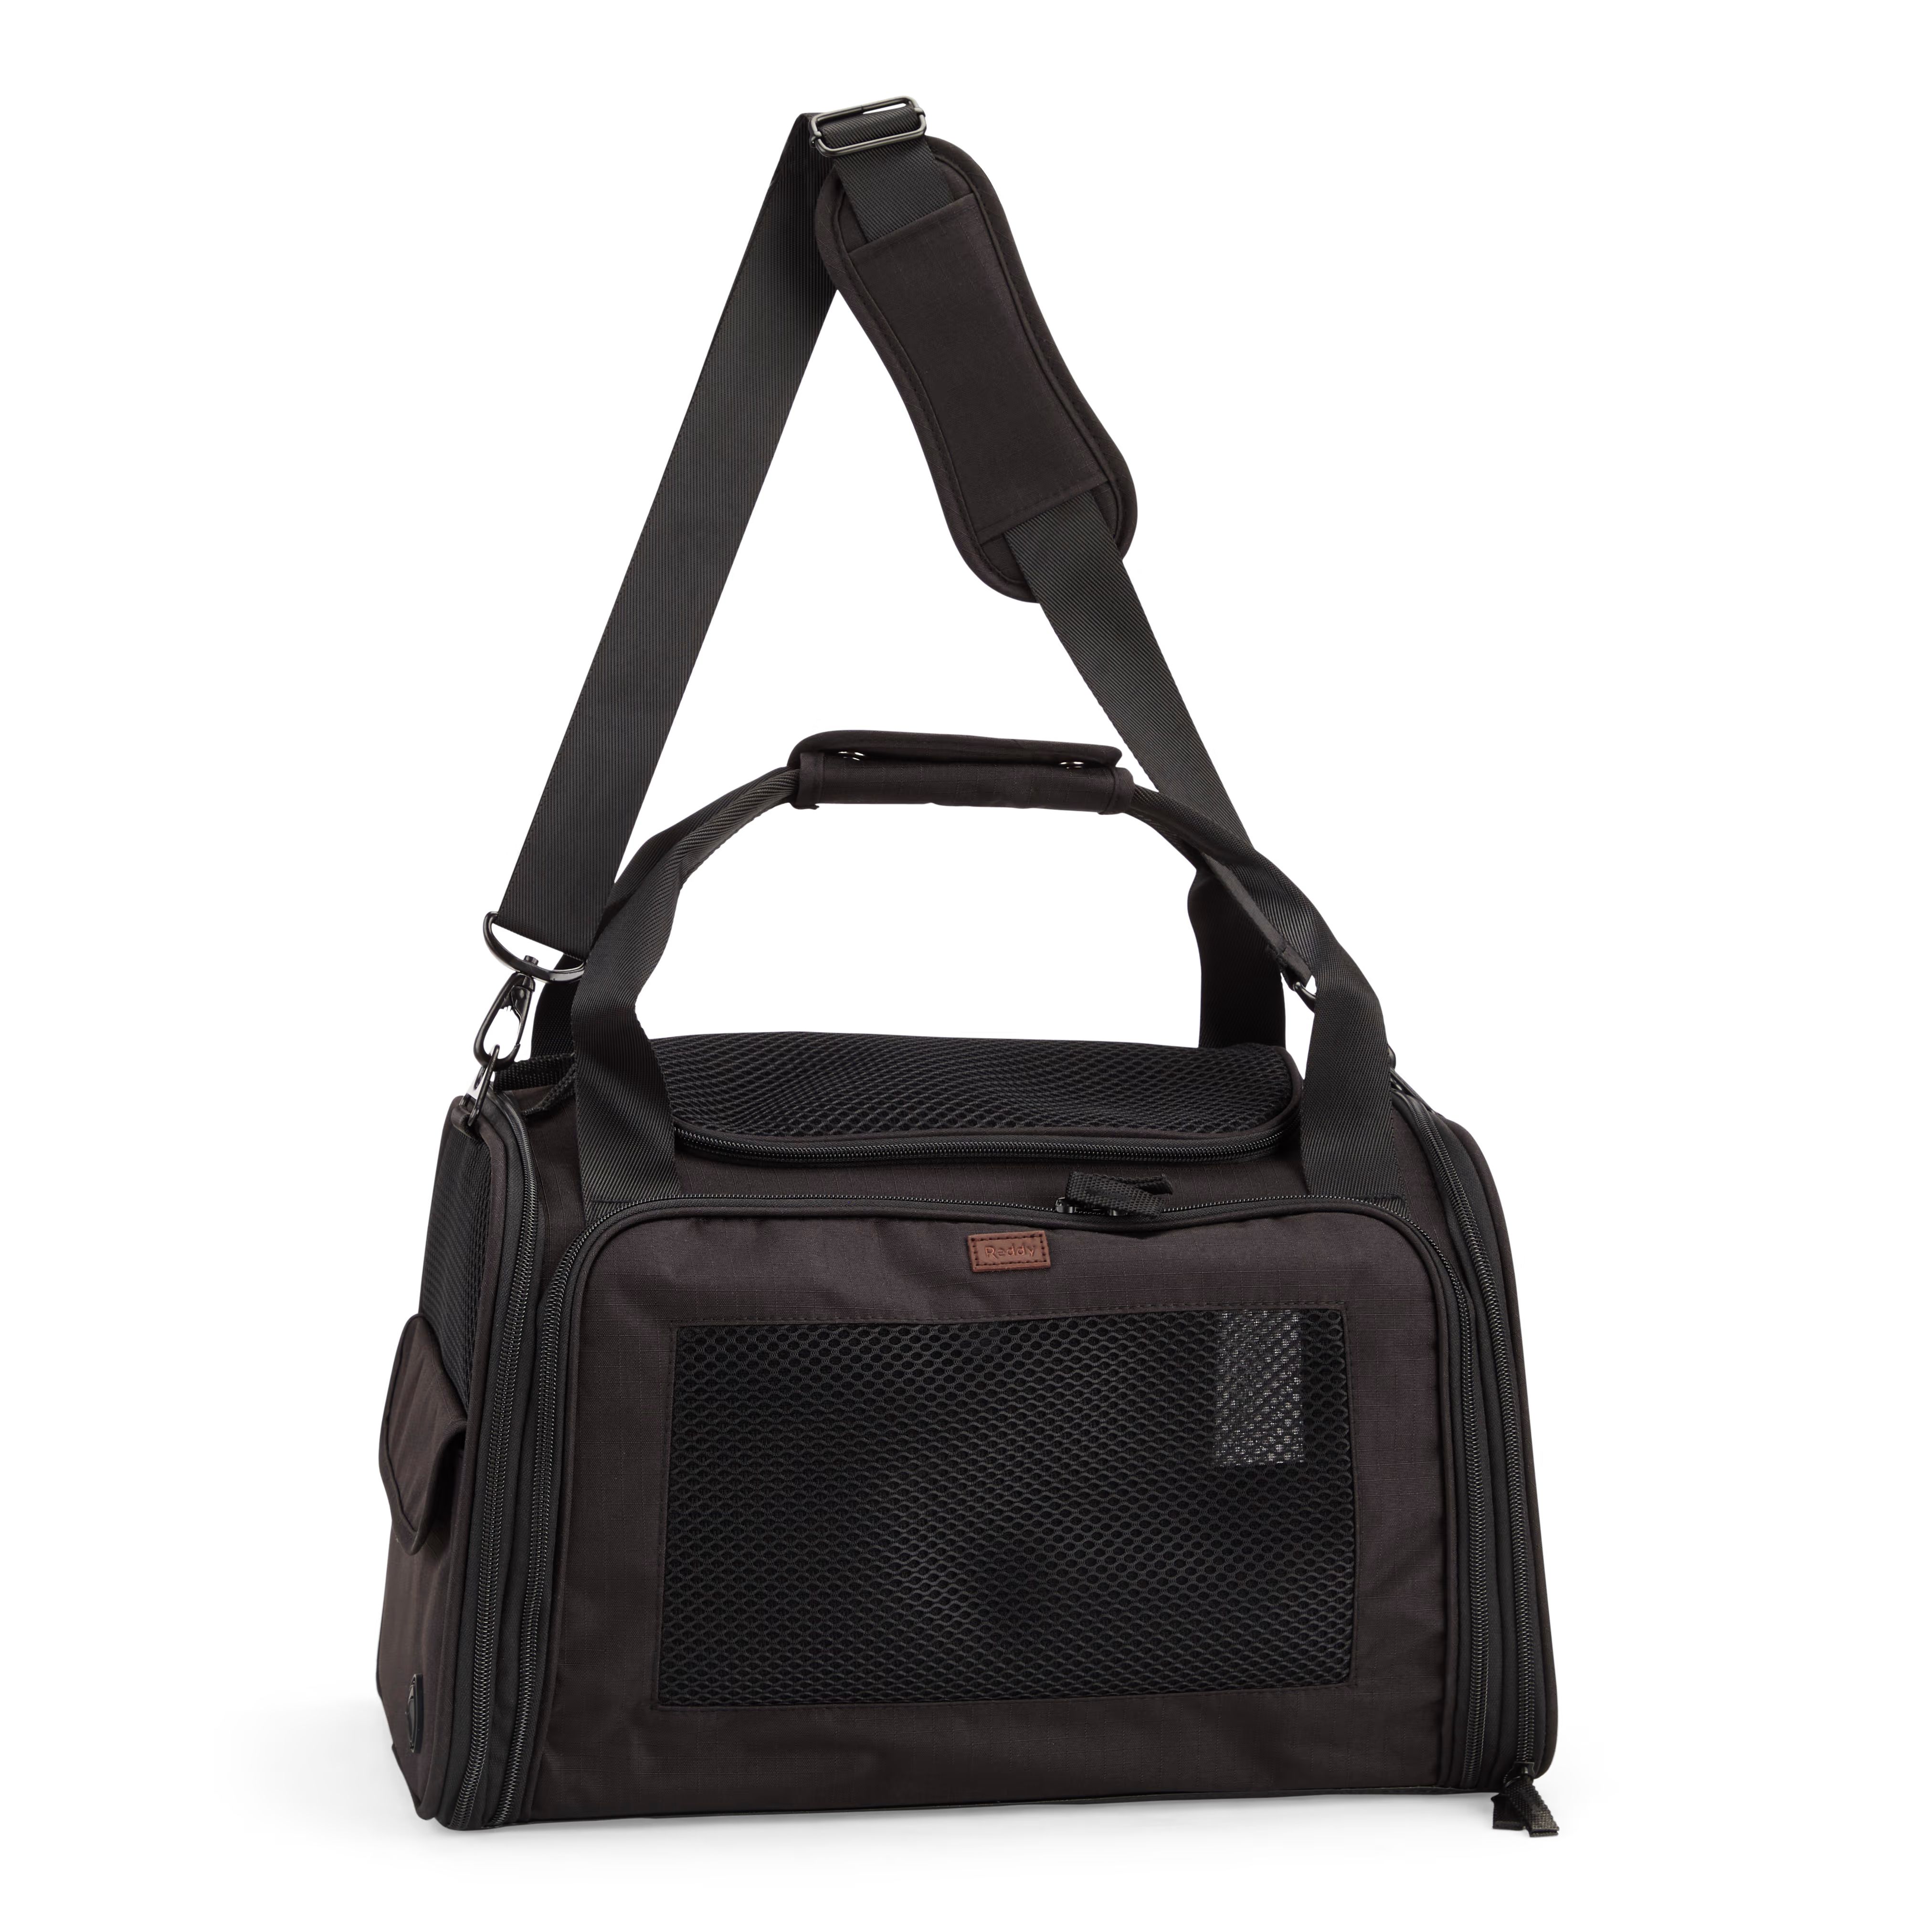 Reddy Black Fold-Out Pet Carrier, Small | Petco